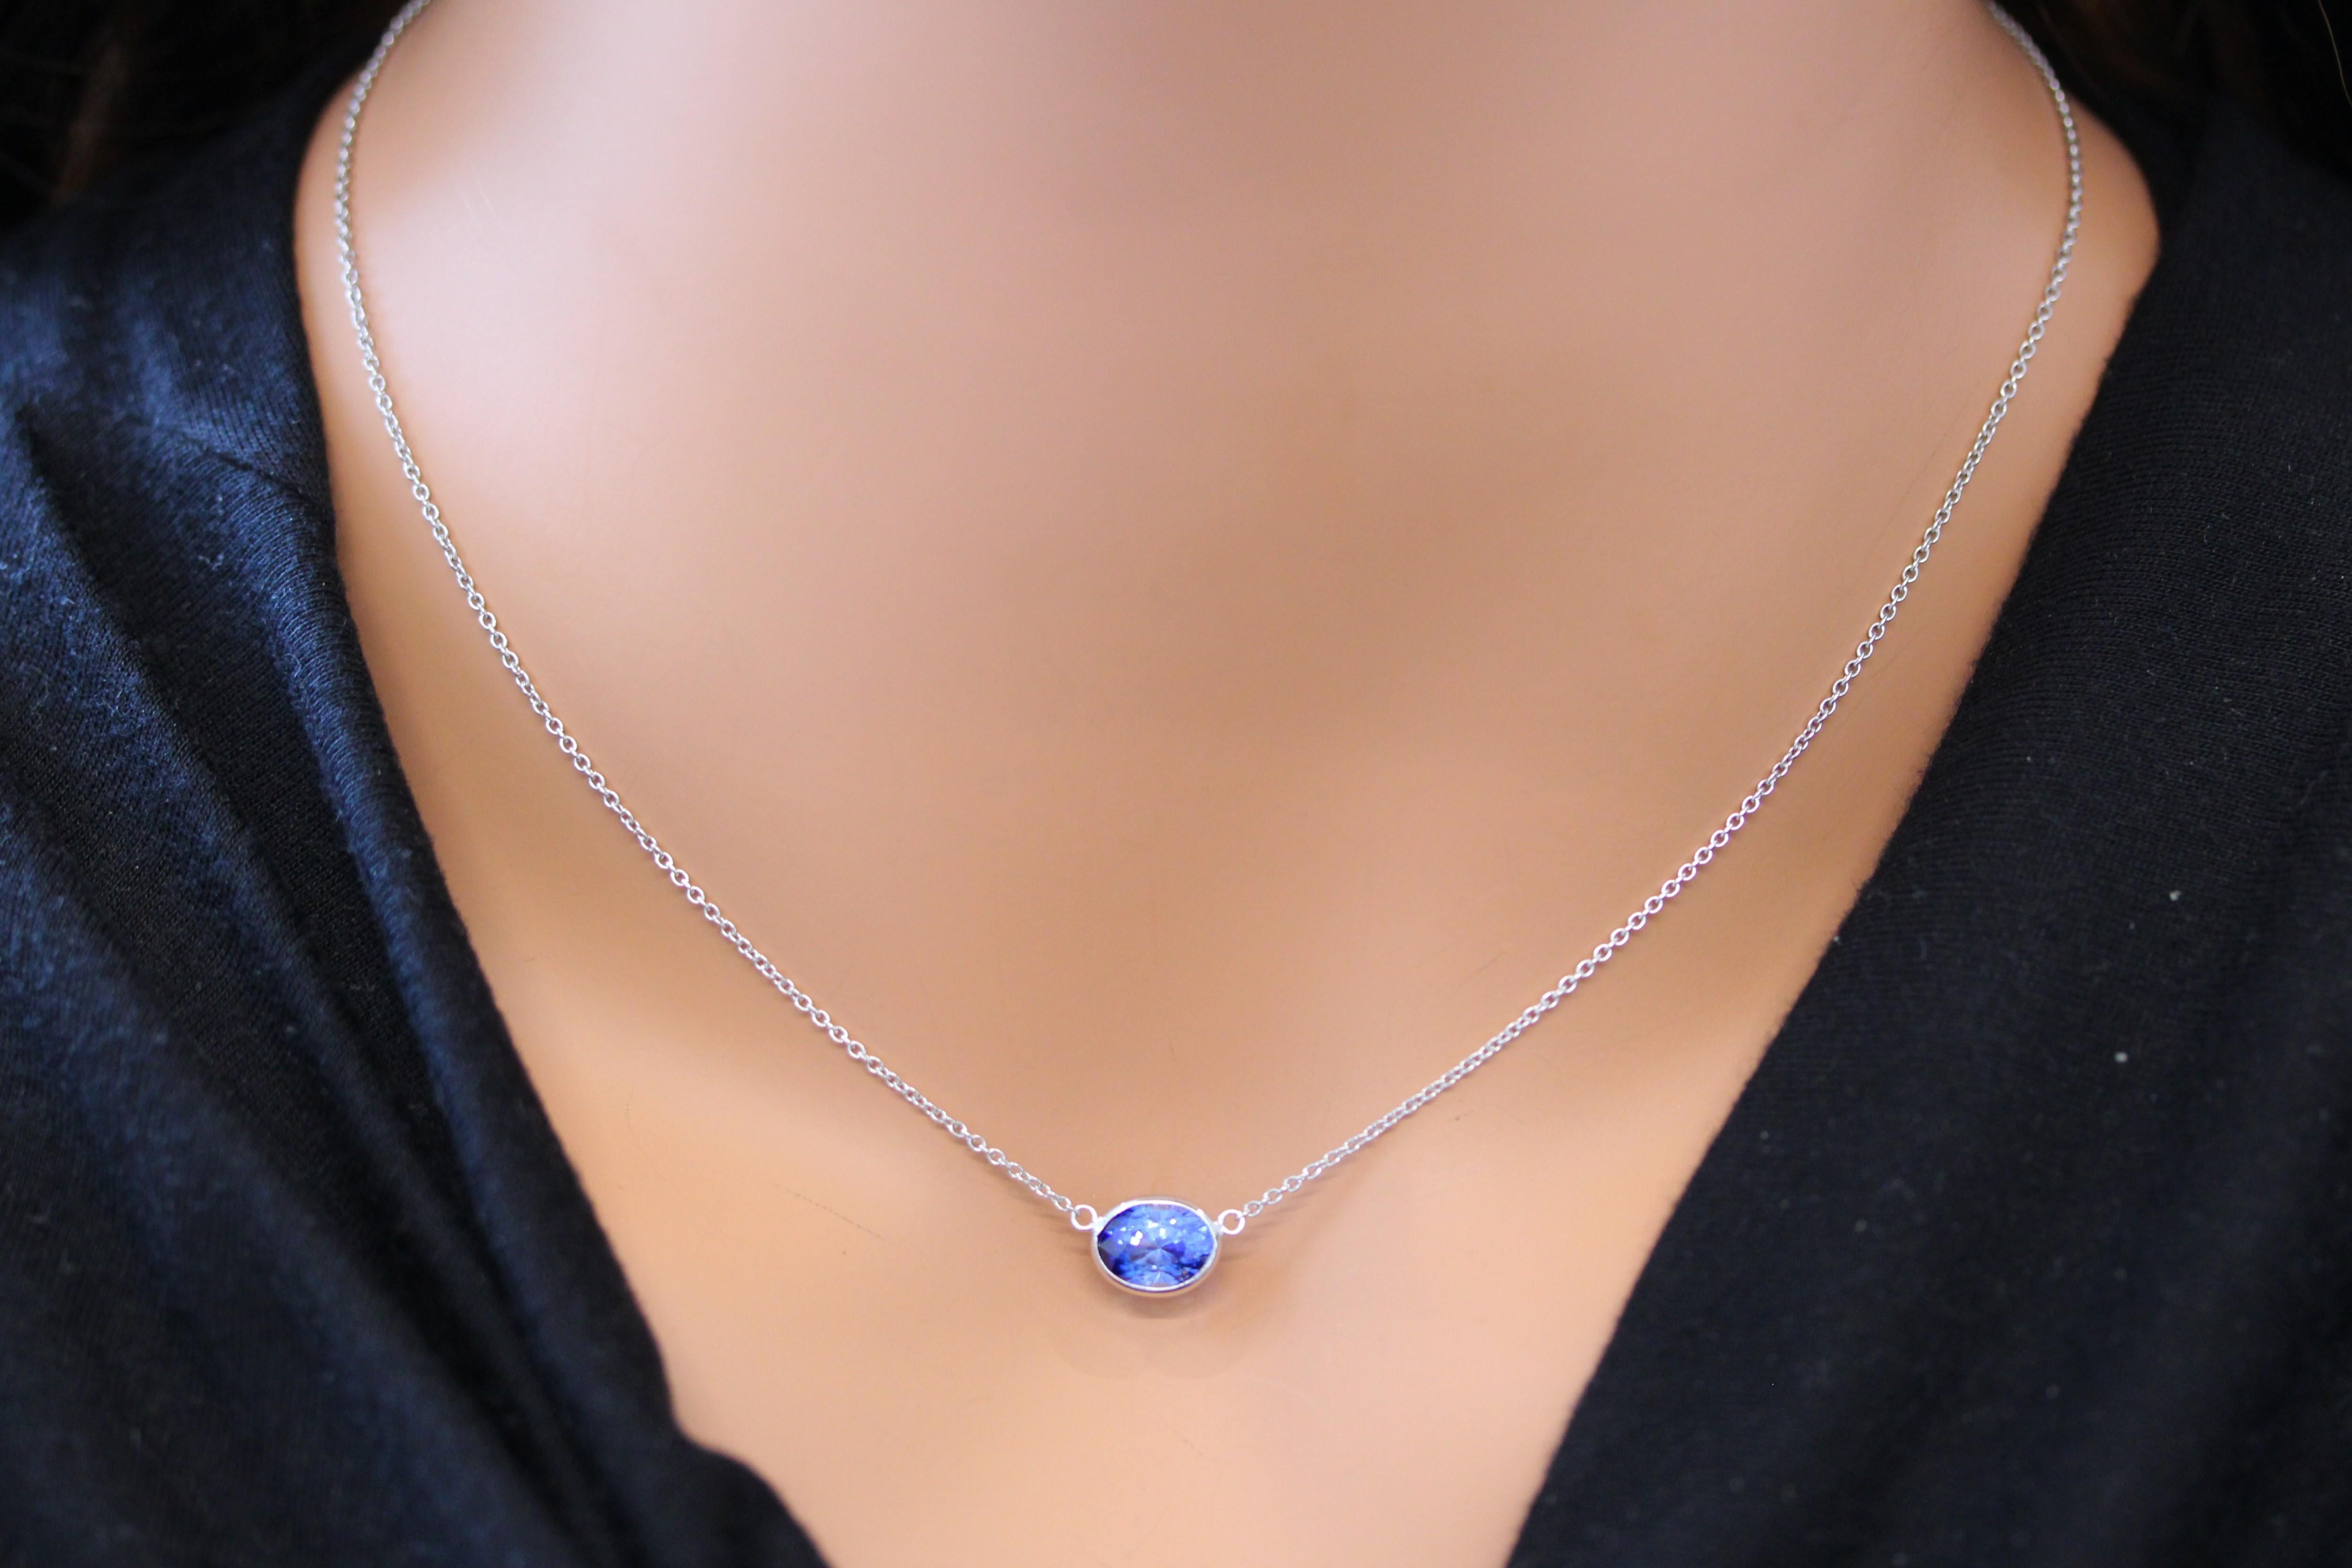 Contemporary 2.89 Carat Oval Sapphire Blue Fashion Necklaces In 14k White Gold For Sale